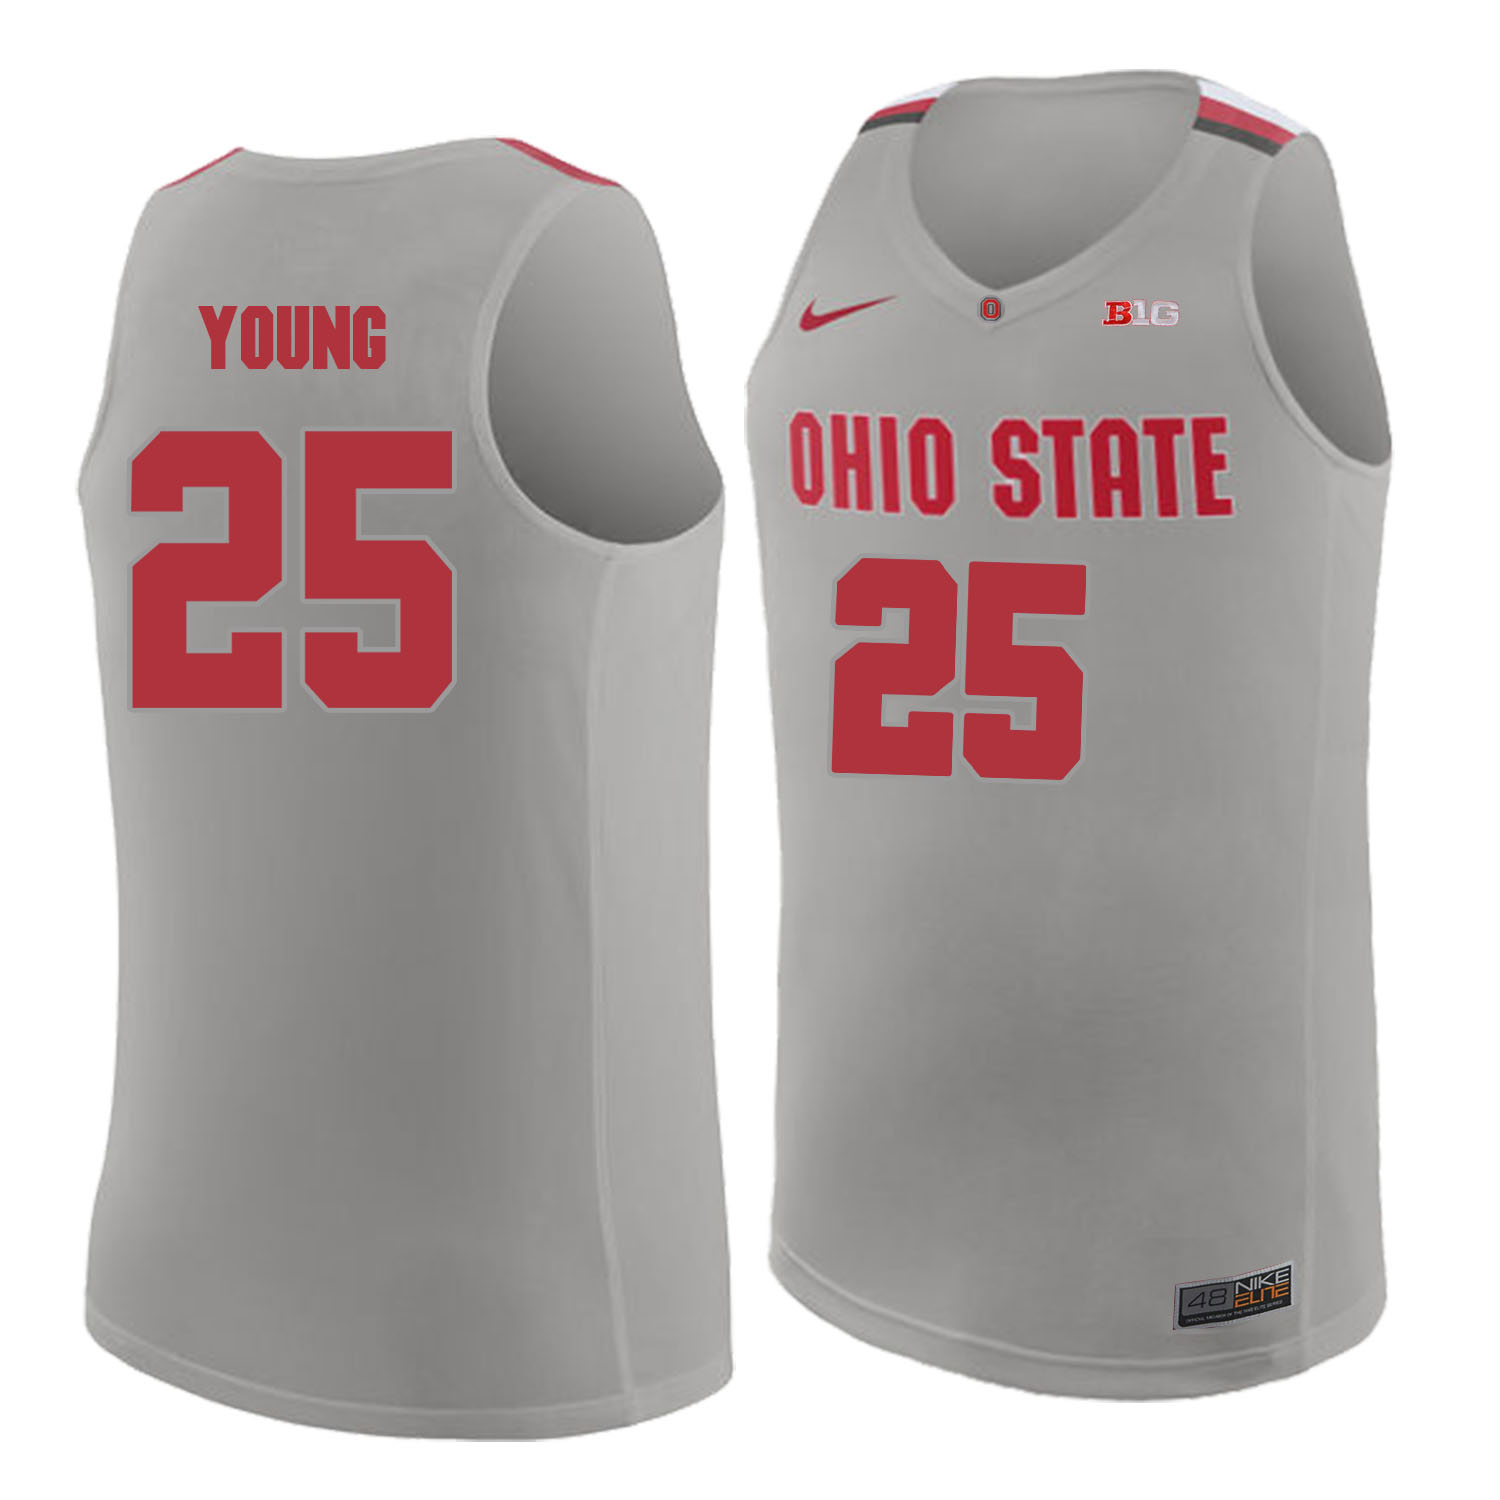 Ohio State Buckeyes 25 Kyle Young Gray College Basketball Jersey